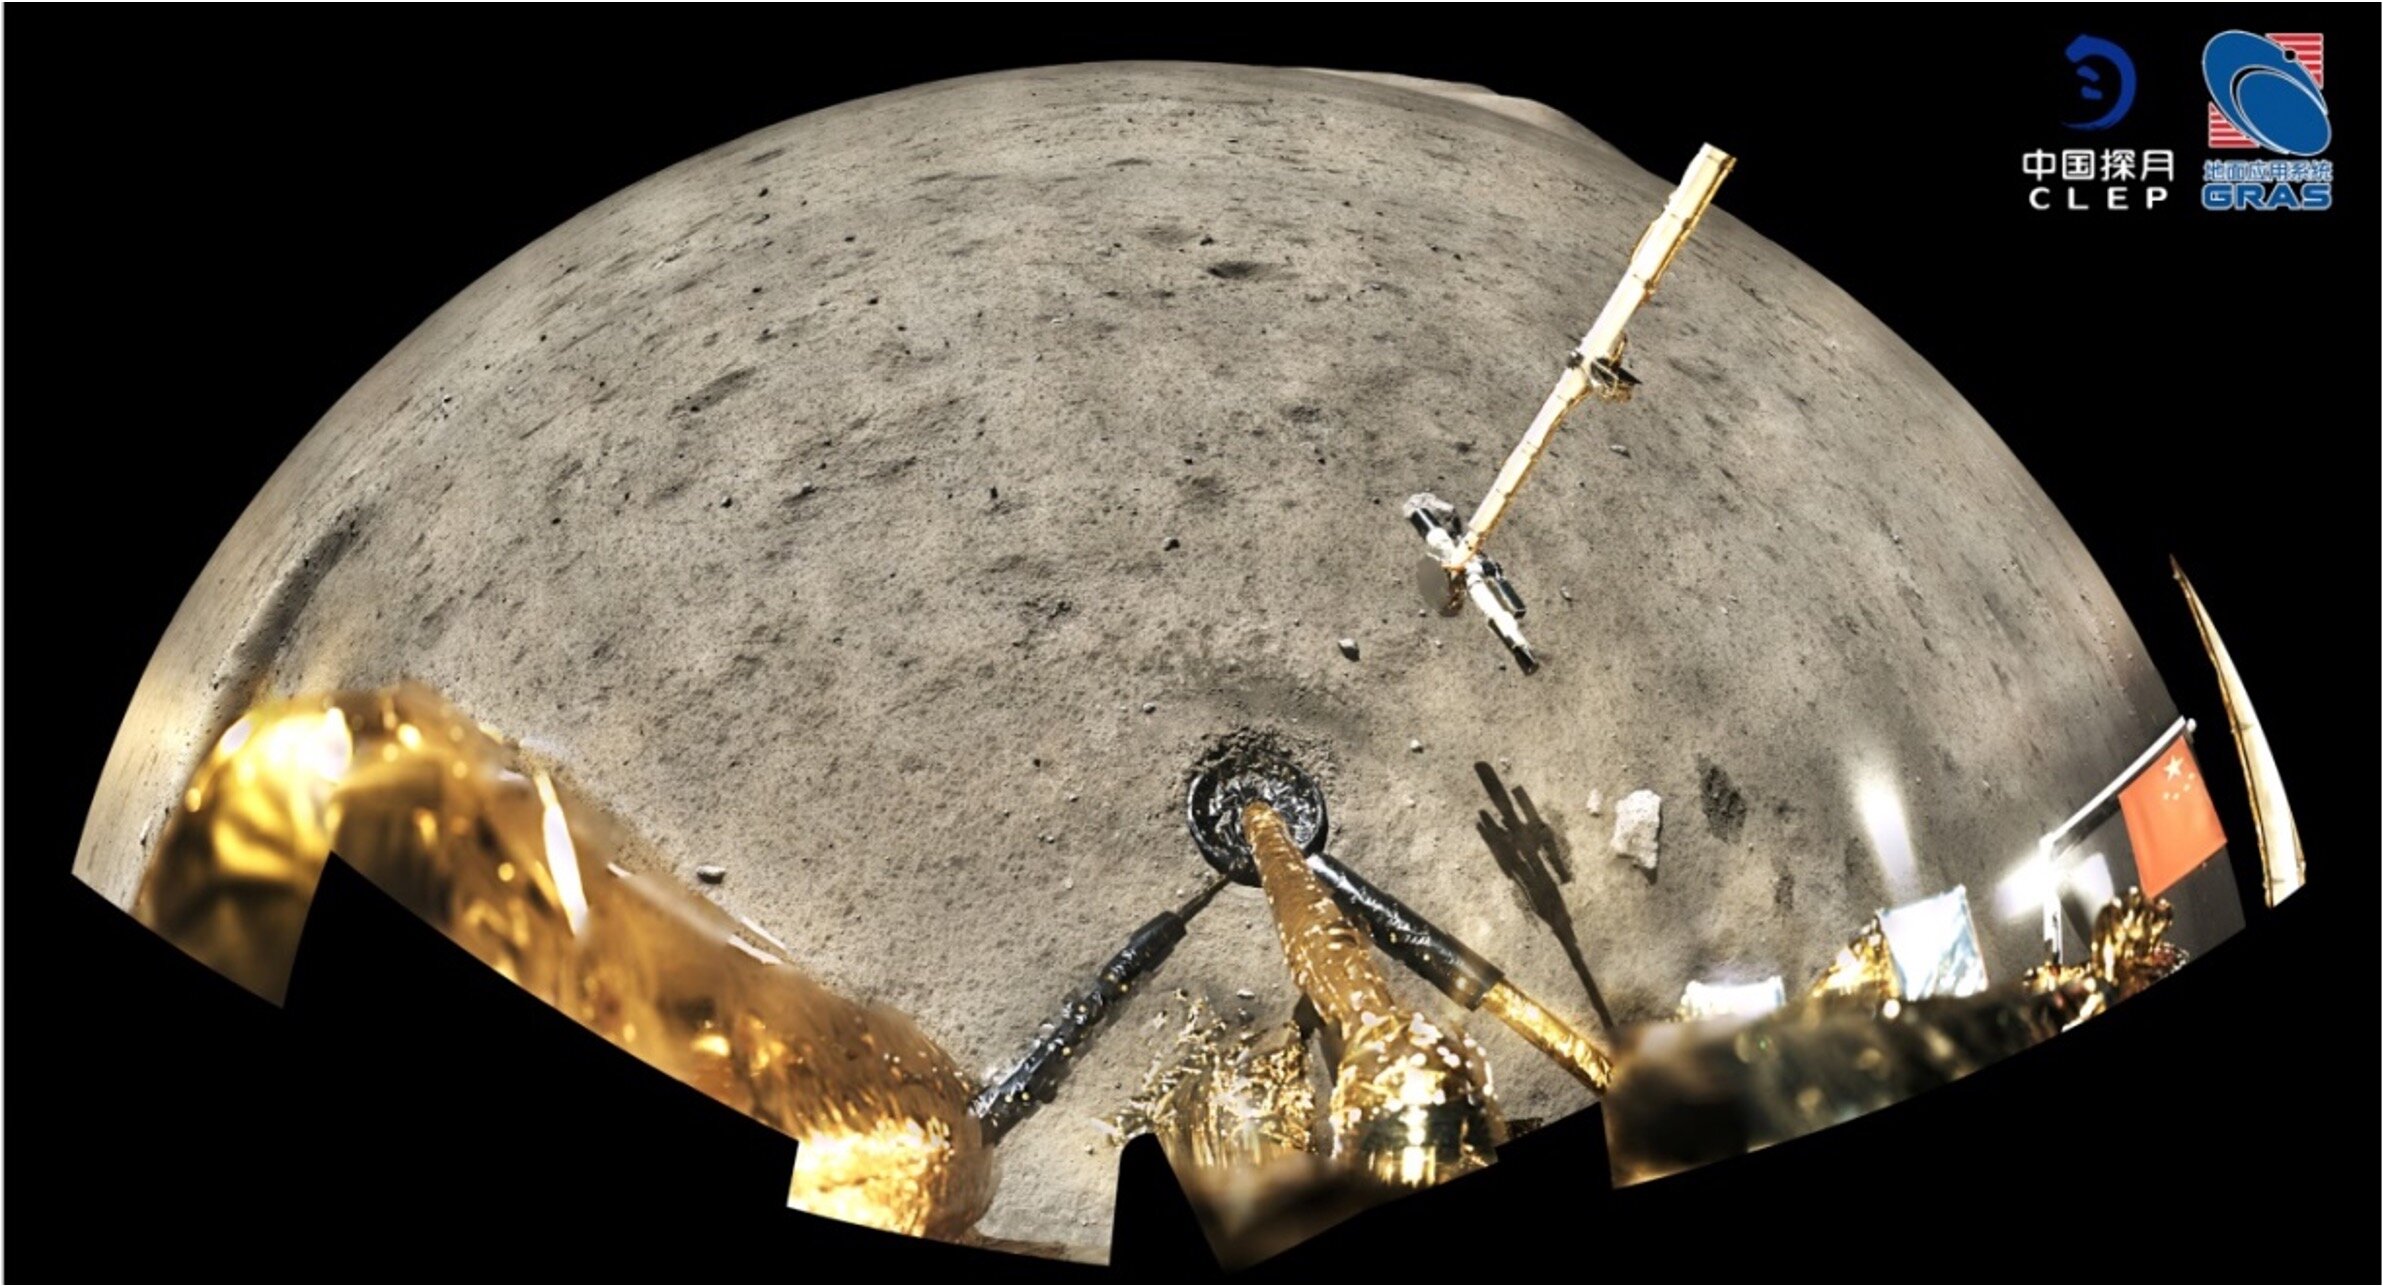 Panoramic image taken by the Chang'e-5 lander after sampling. Credit: CNSA (China National Space Administration) / CLEP (China Lunar Exploration Program) / GRAS (Ground Research Application System)